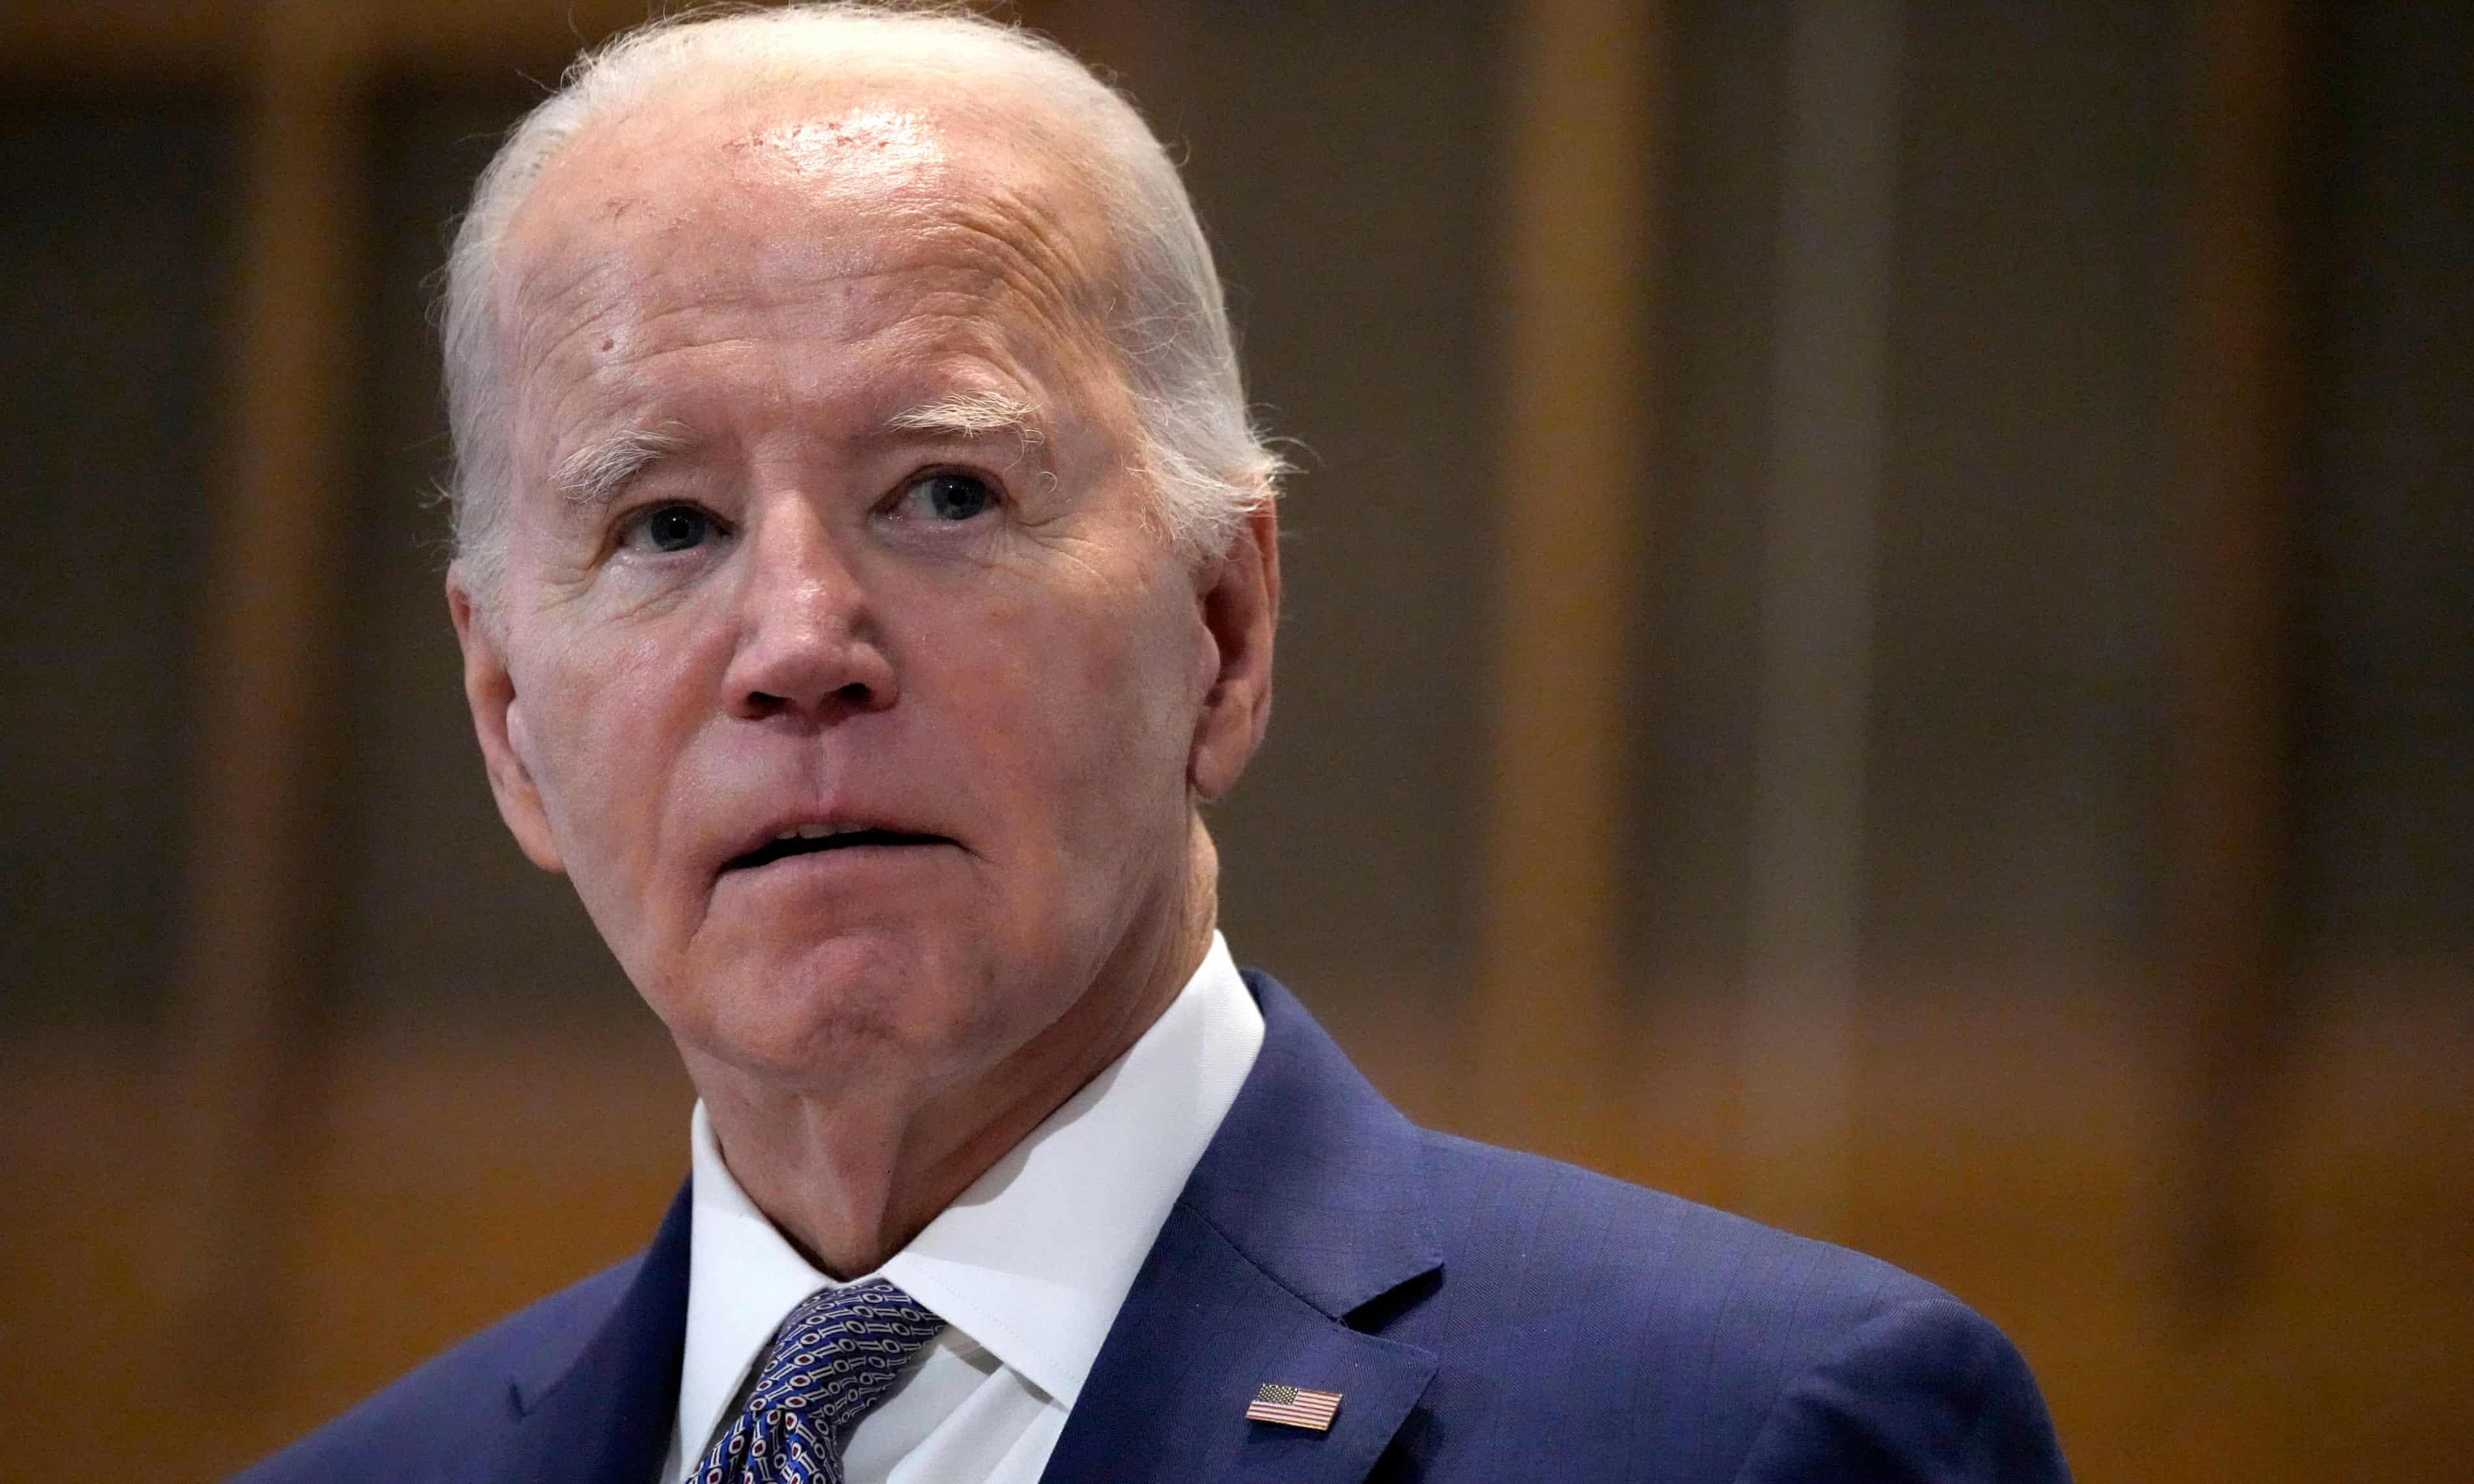 Biden vows response at time ‘of our choosing’ after three US troops killed in Jordan drone attack (theguardian.com)